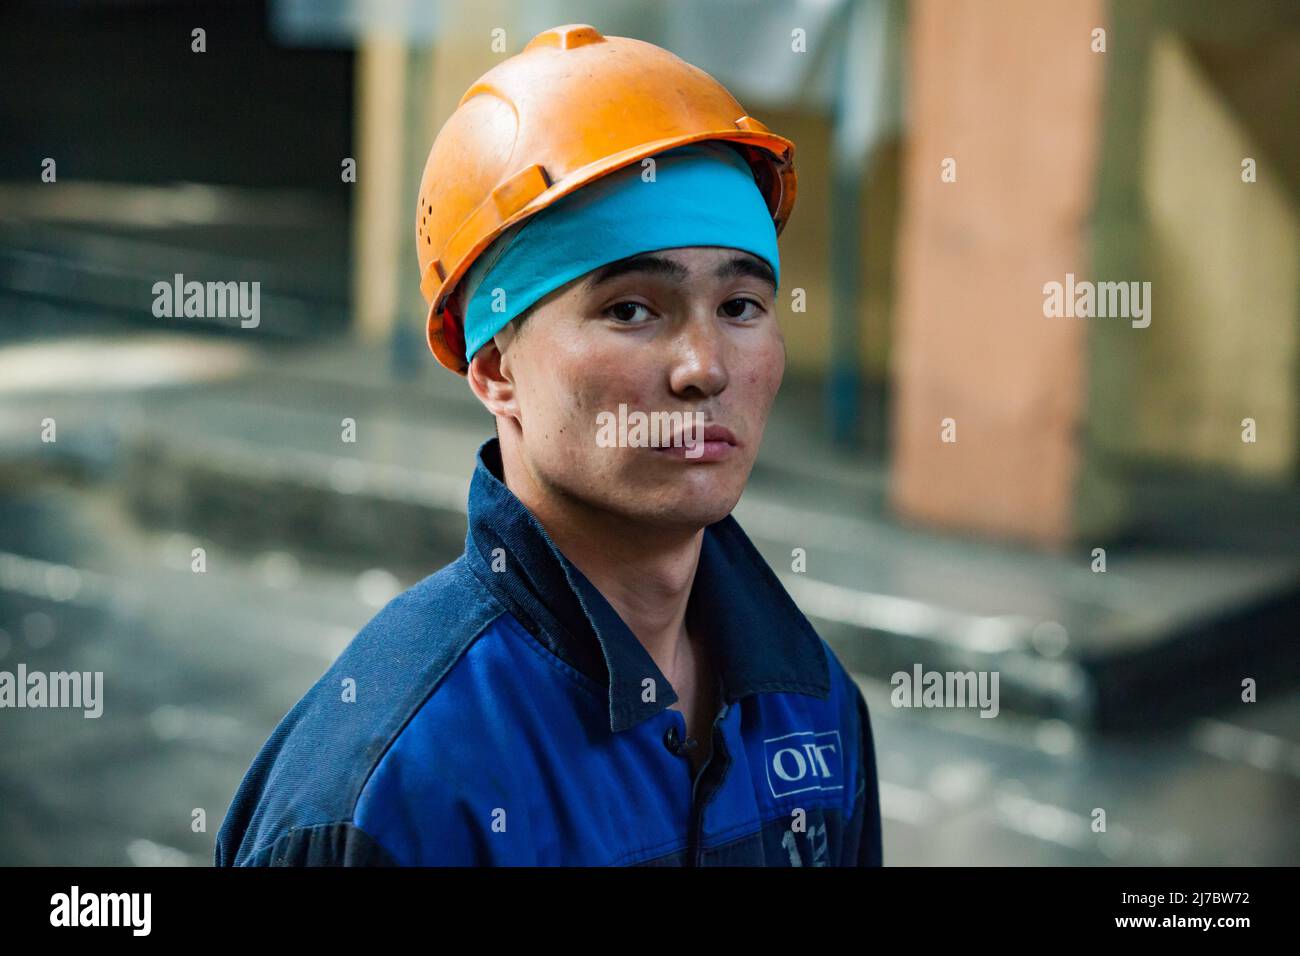 Ust'-Kamenogorsk, Kazakhstan - May 31, 2012: Portrait of young Asian worker in blue bandana and orange hardhat. Looks straight in camera. Blurred back Stock Photo